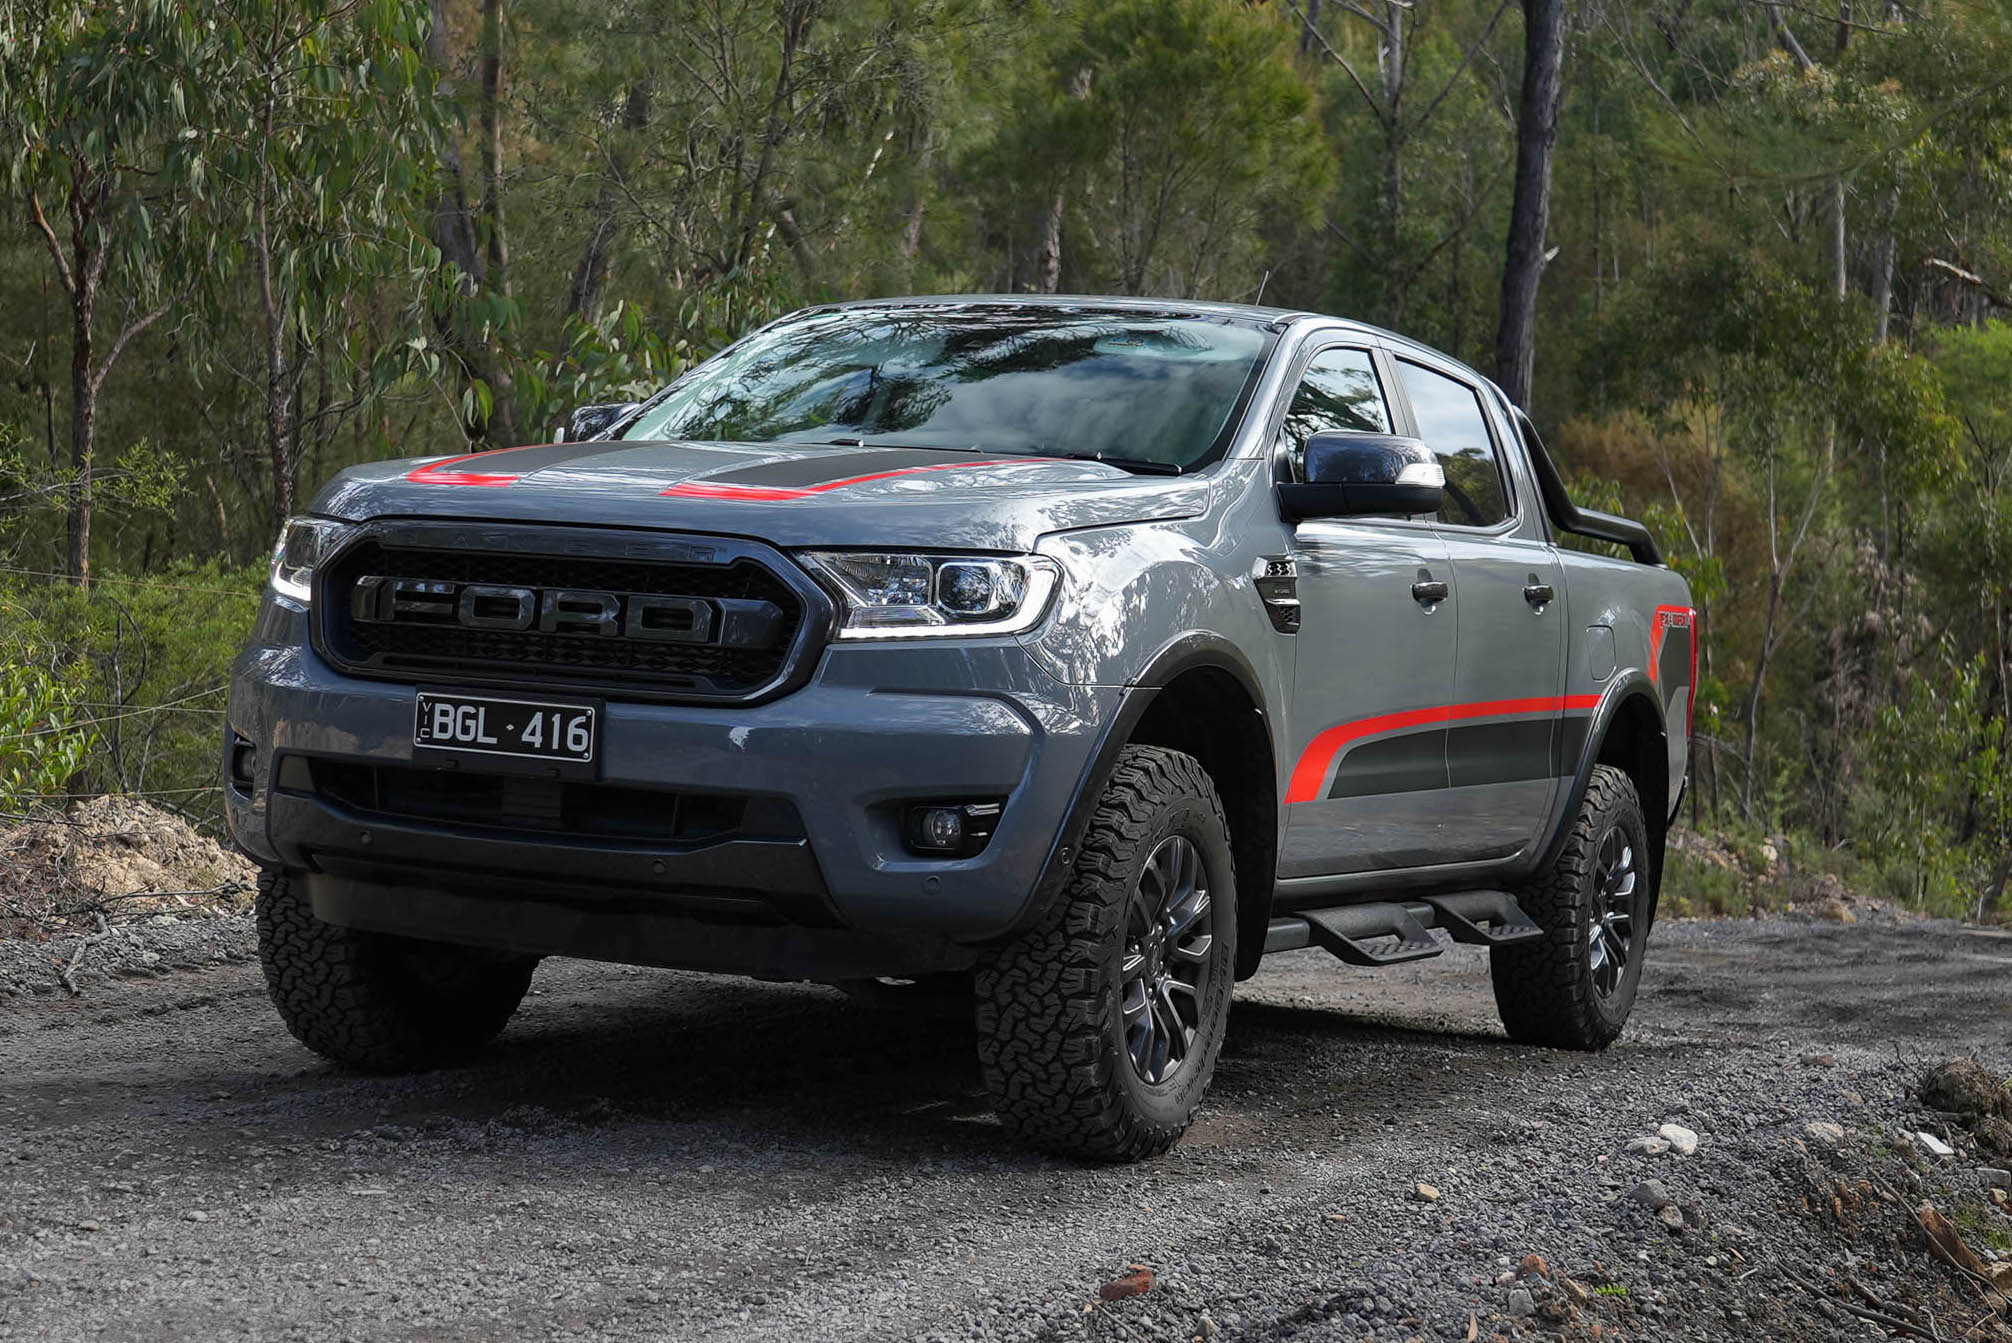 2021 Ford Ranger FX4 Max review (video)